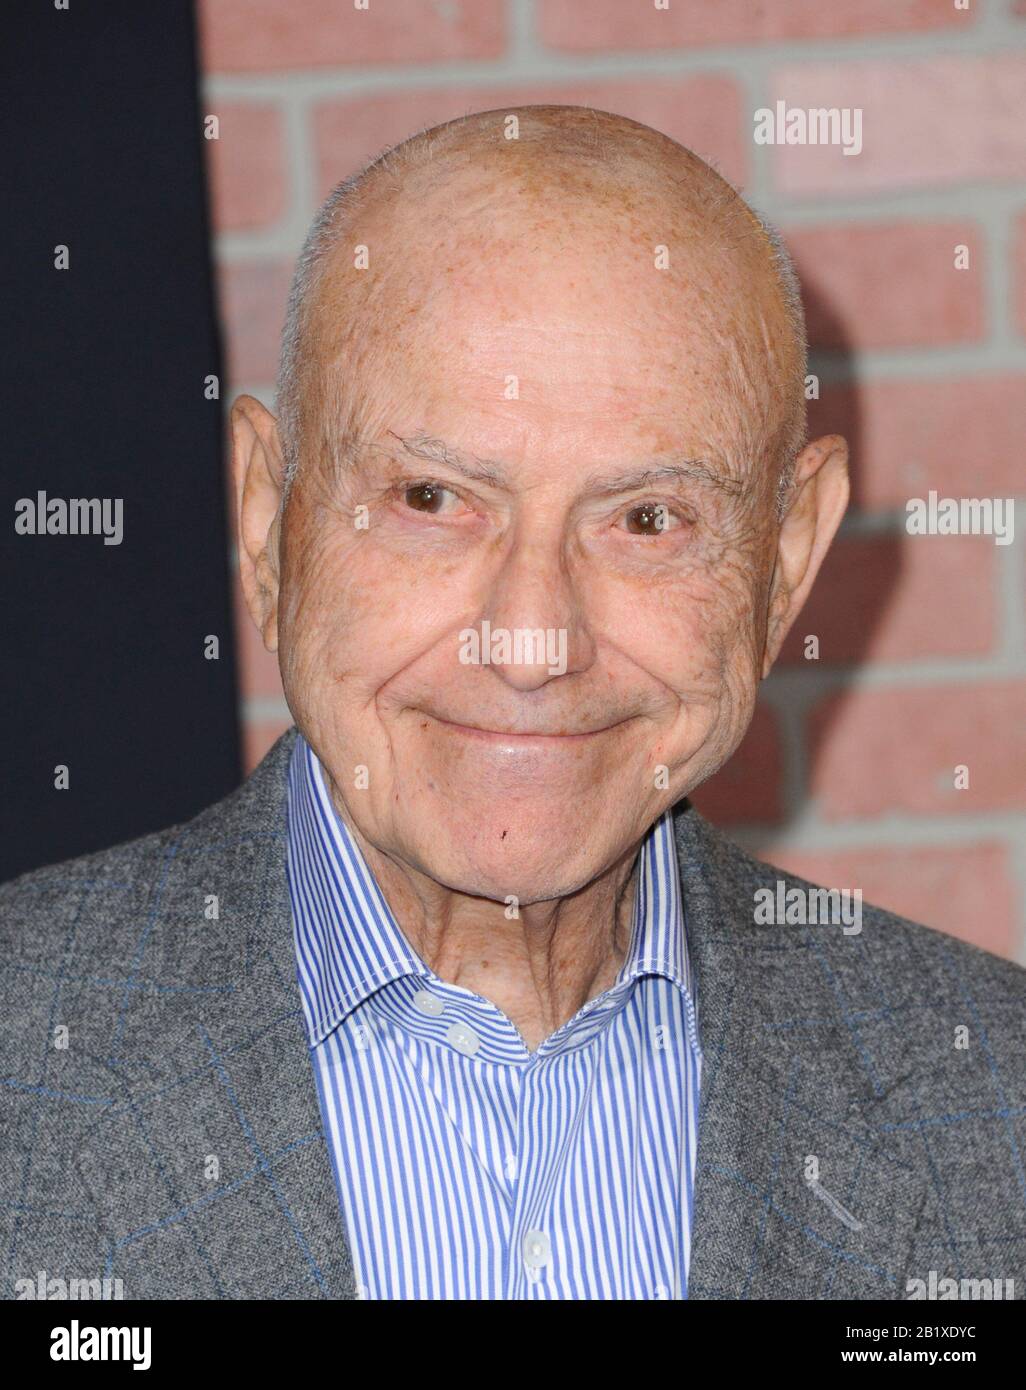 Los Angeles, CA. 27th Feb, 2020. Alan Arkin at arrivals for SPENSER CONFIDENTIAL Premiere on Netflix, Regency Village Theatre - Westwood, Los Angeles, CA February 27, 2020. Credit: Elizabeth Goodenough/Everett Collection/Alamy Live News Stock Photo